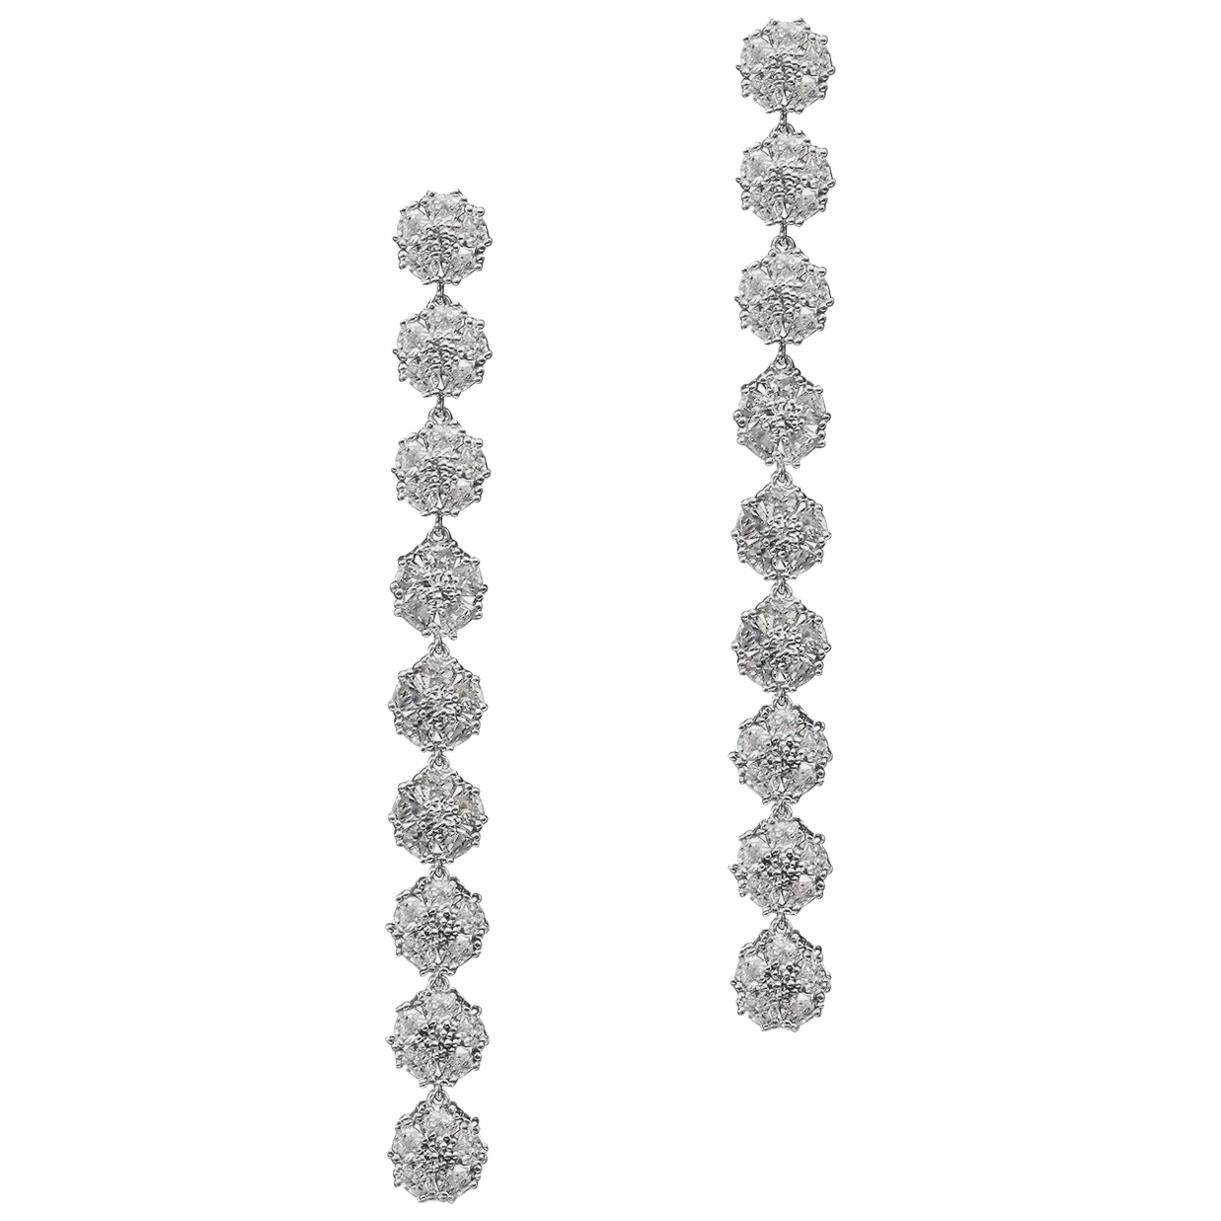 Trillion Cut Blossom Gentile Ombre Chandelier Earrings, White, Gray and Black Gemstones For Sale